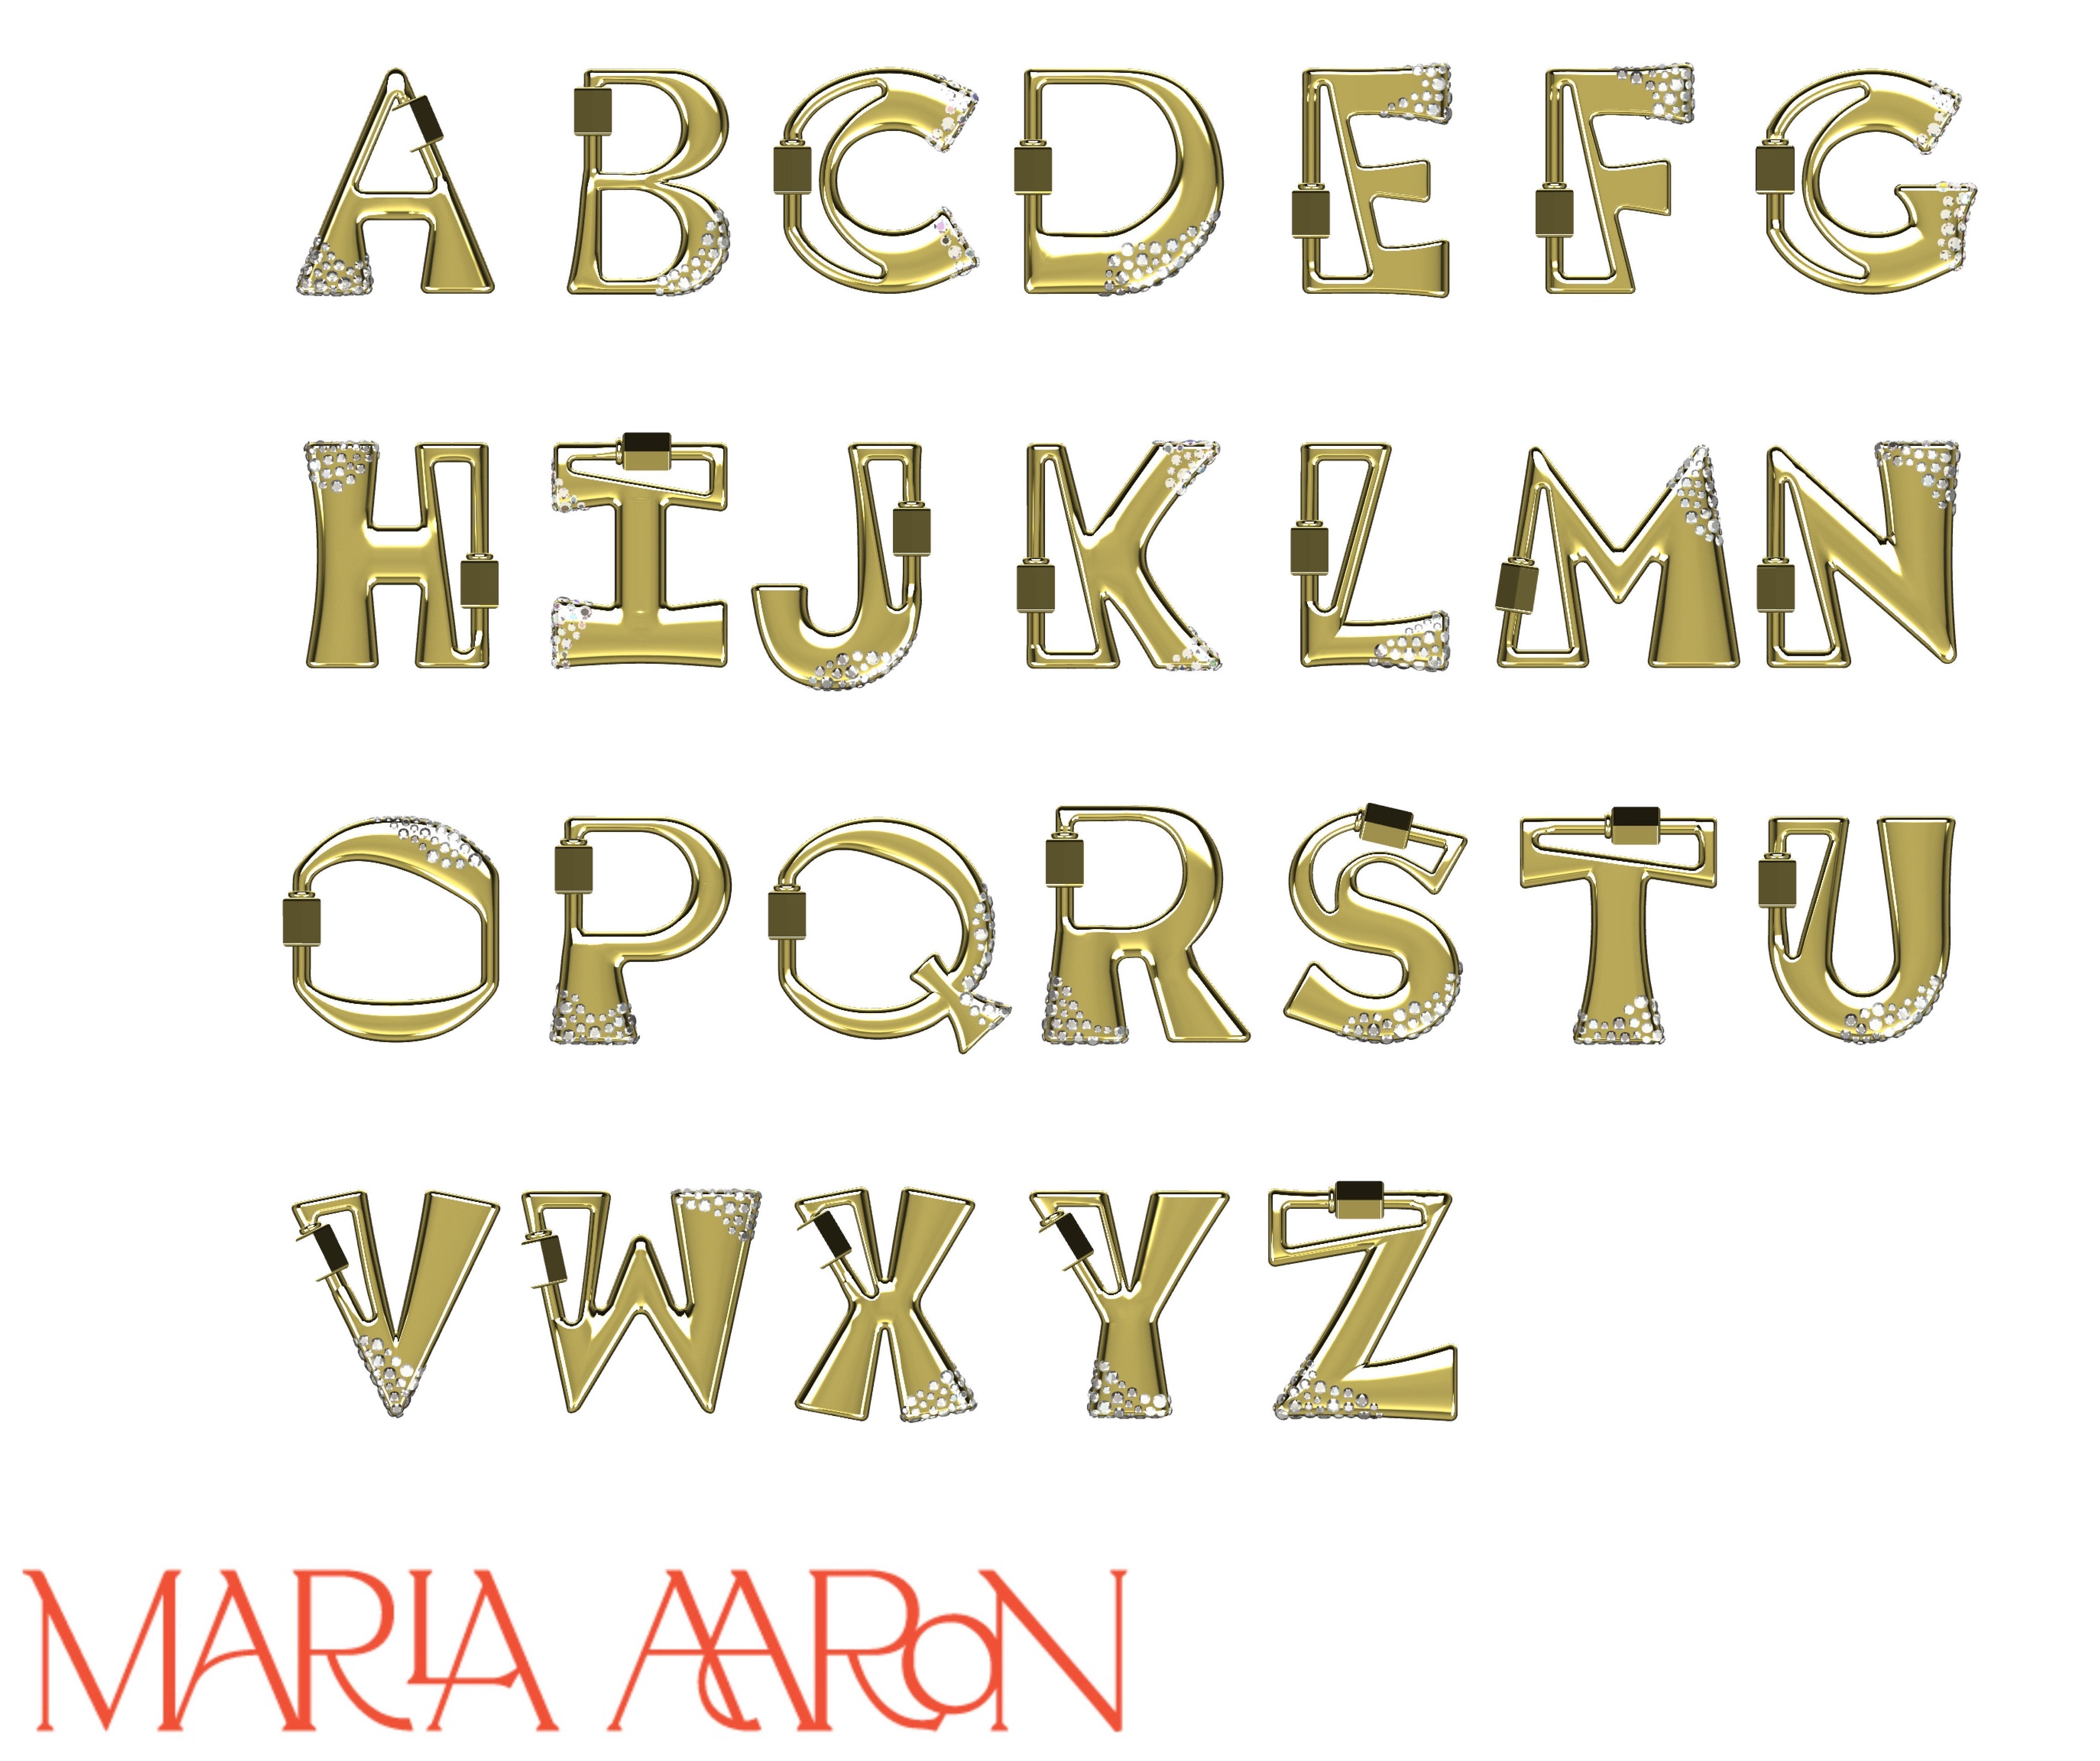 Gold locks of every letter of the alphabet including E lock against white backdrop with Marla Aaron logo in bottom left corner